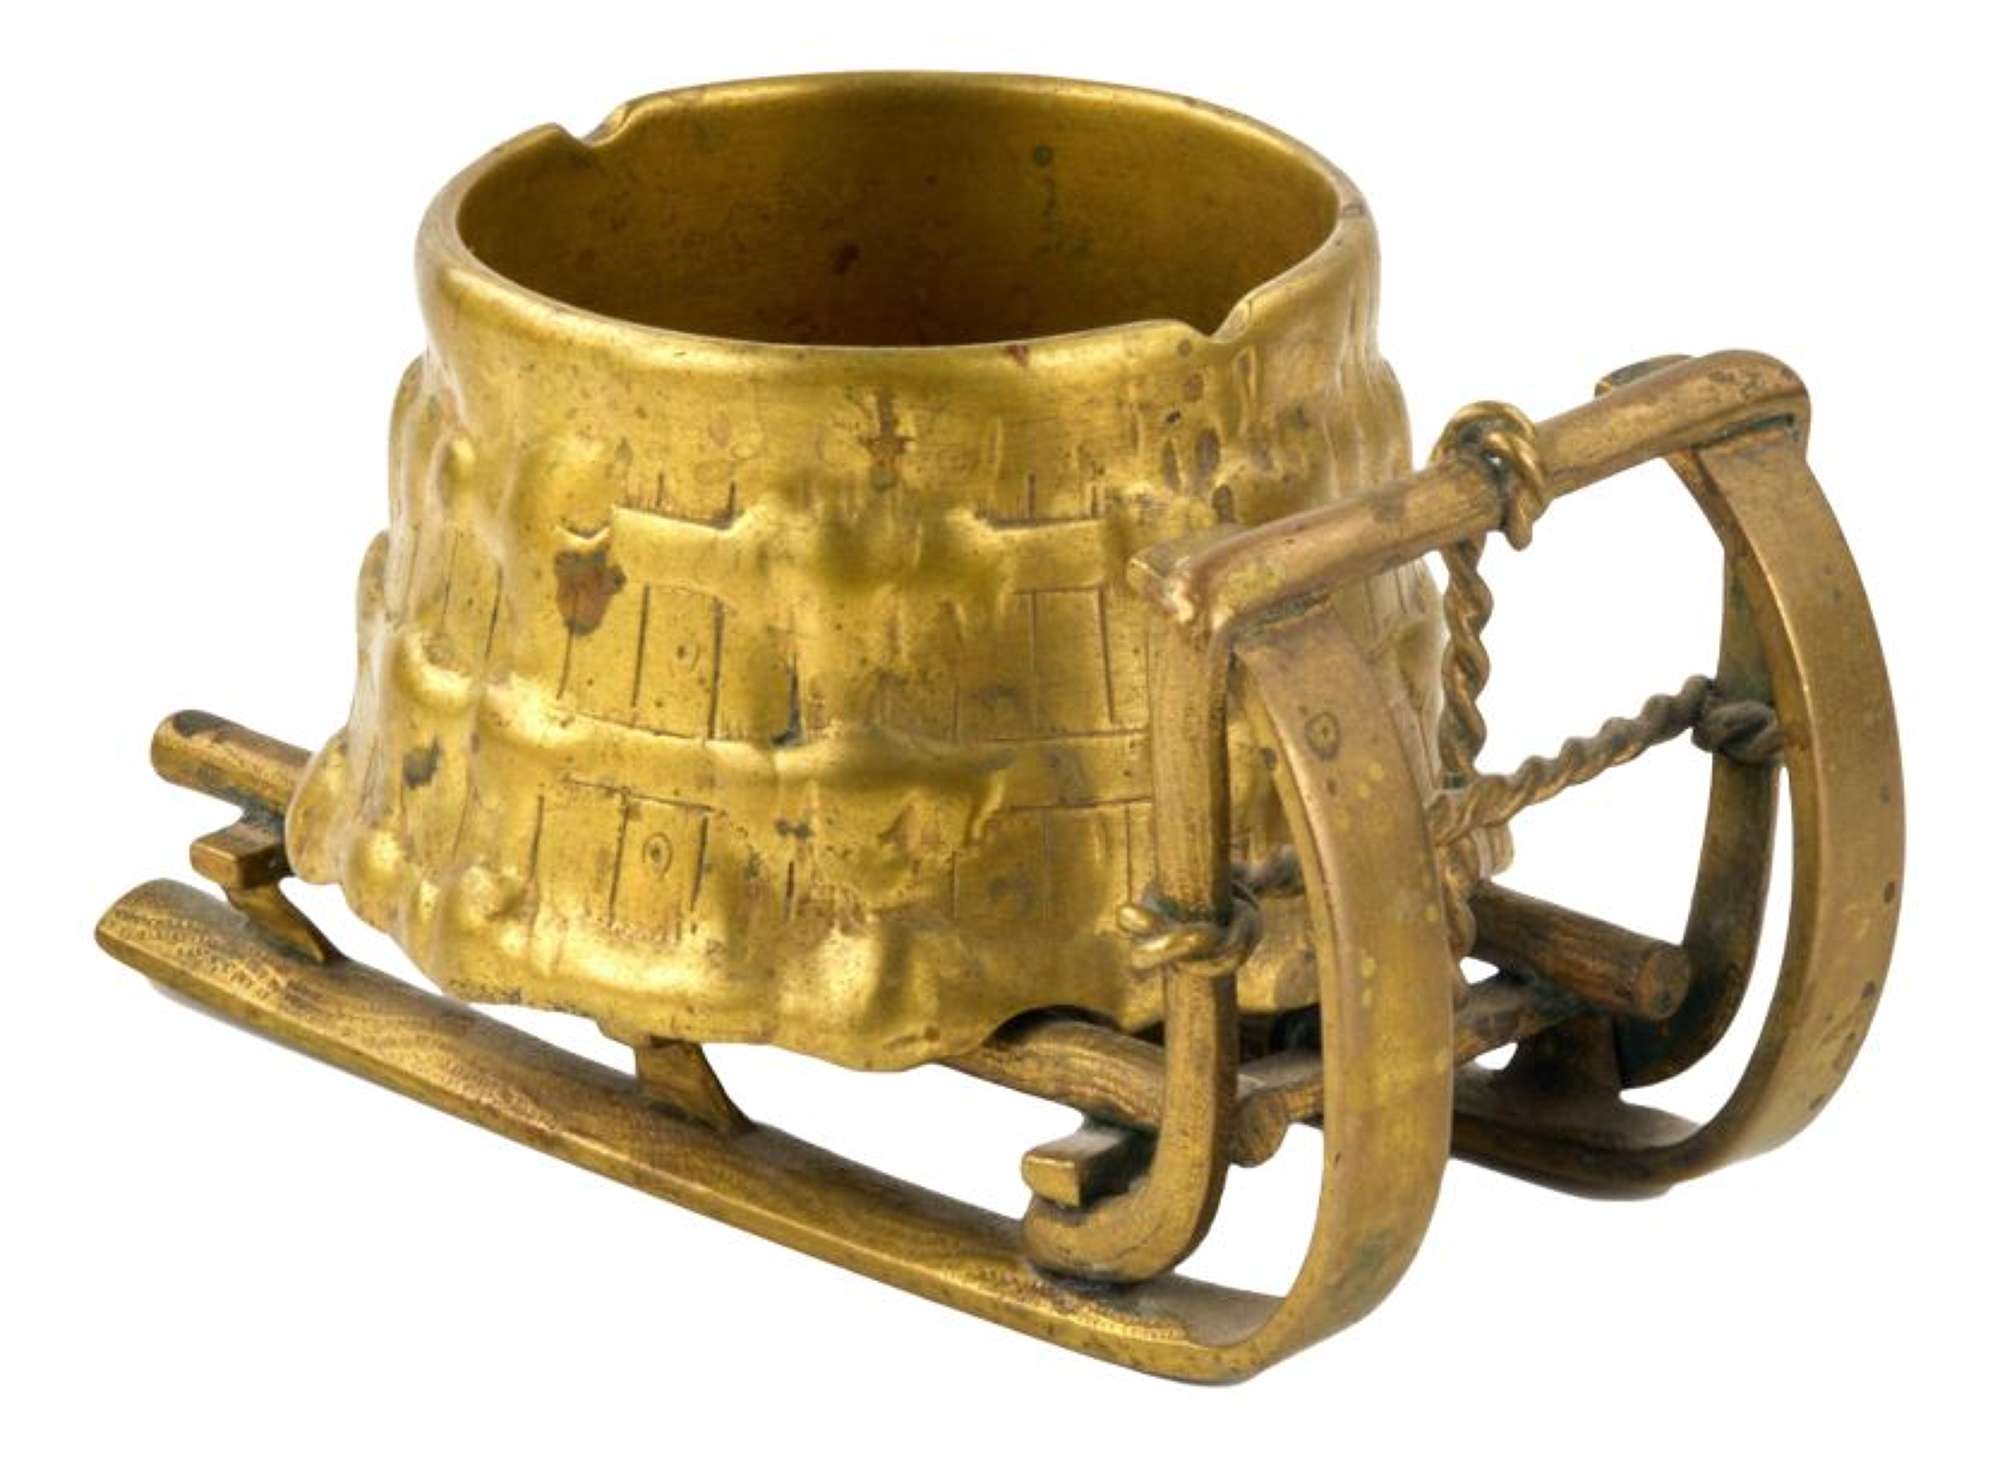 Brass Ashtray or Inkwell